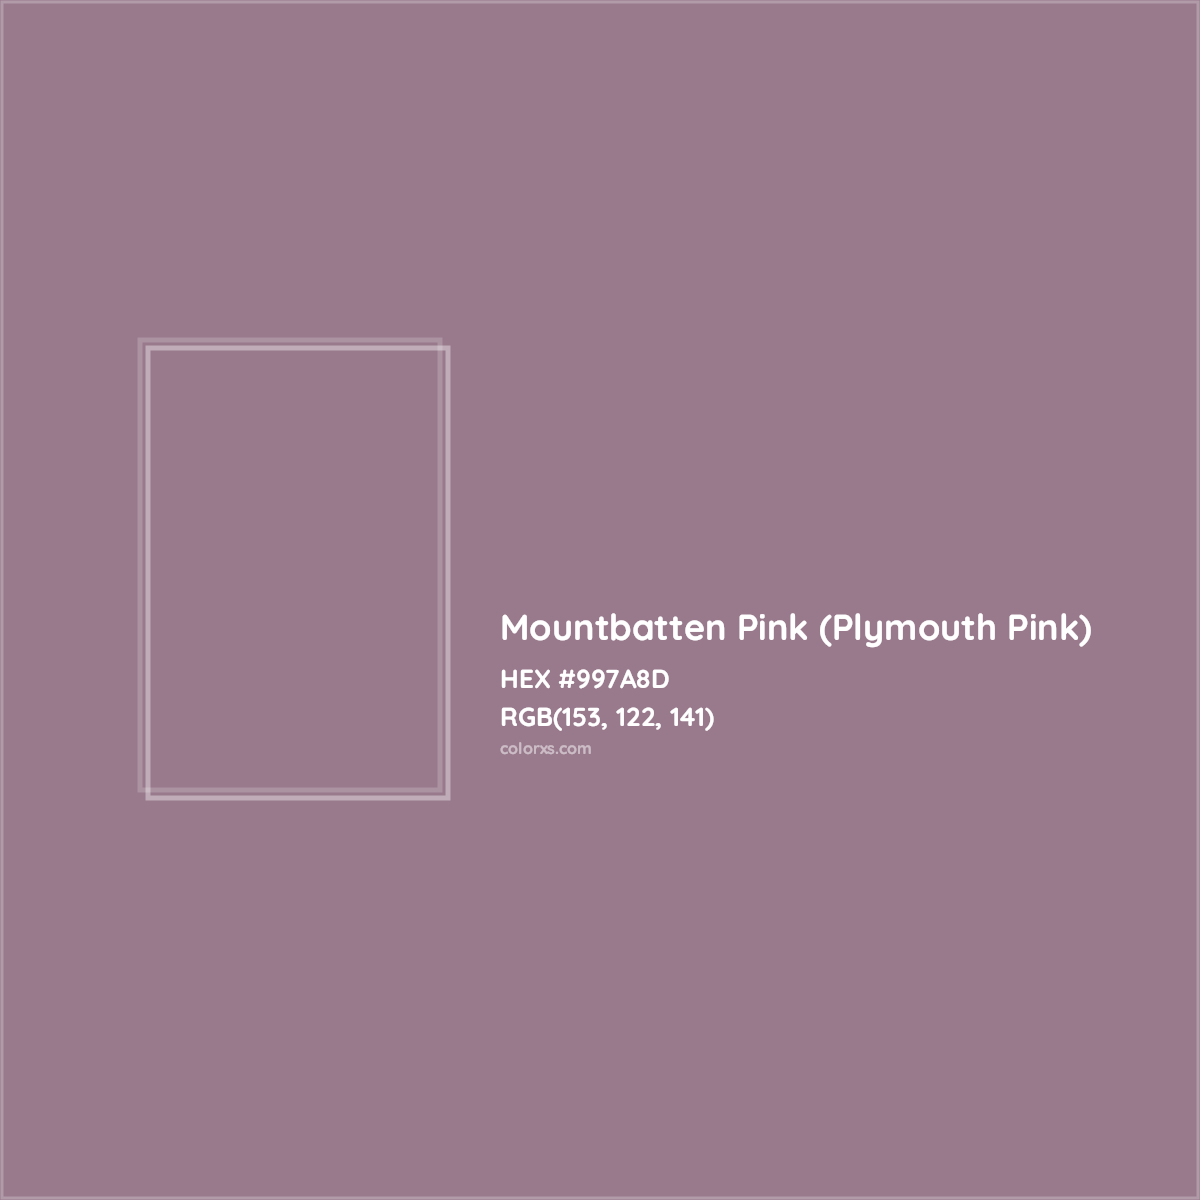 HEX #997A8D Mountbatten Pink (Plymouth Pink) Color - Color Code